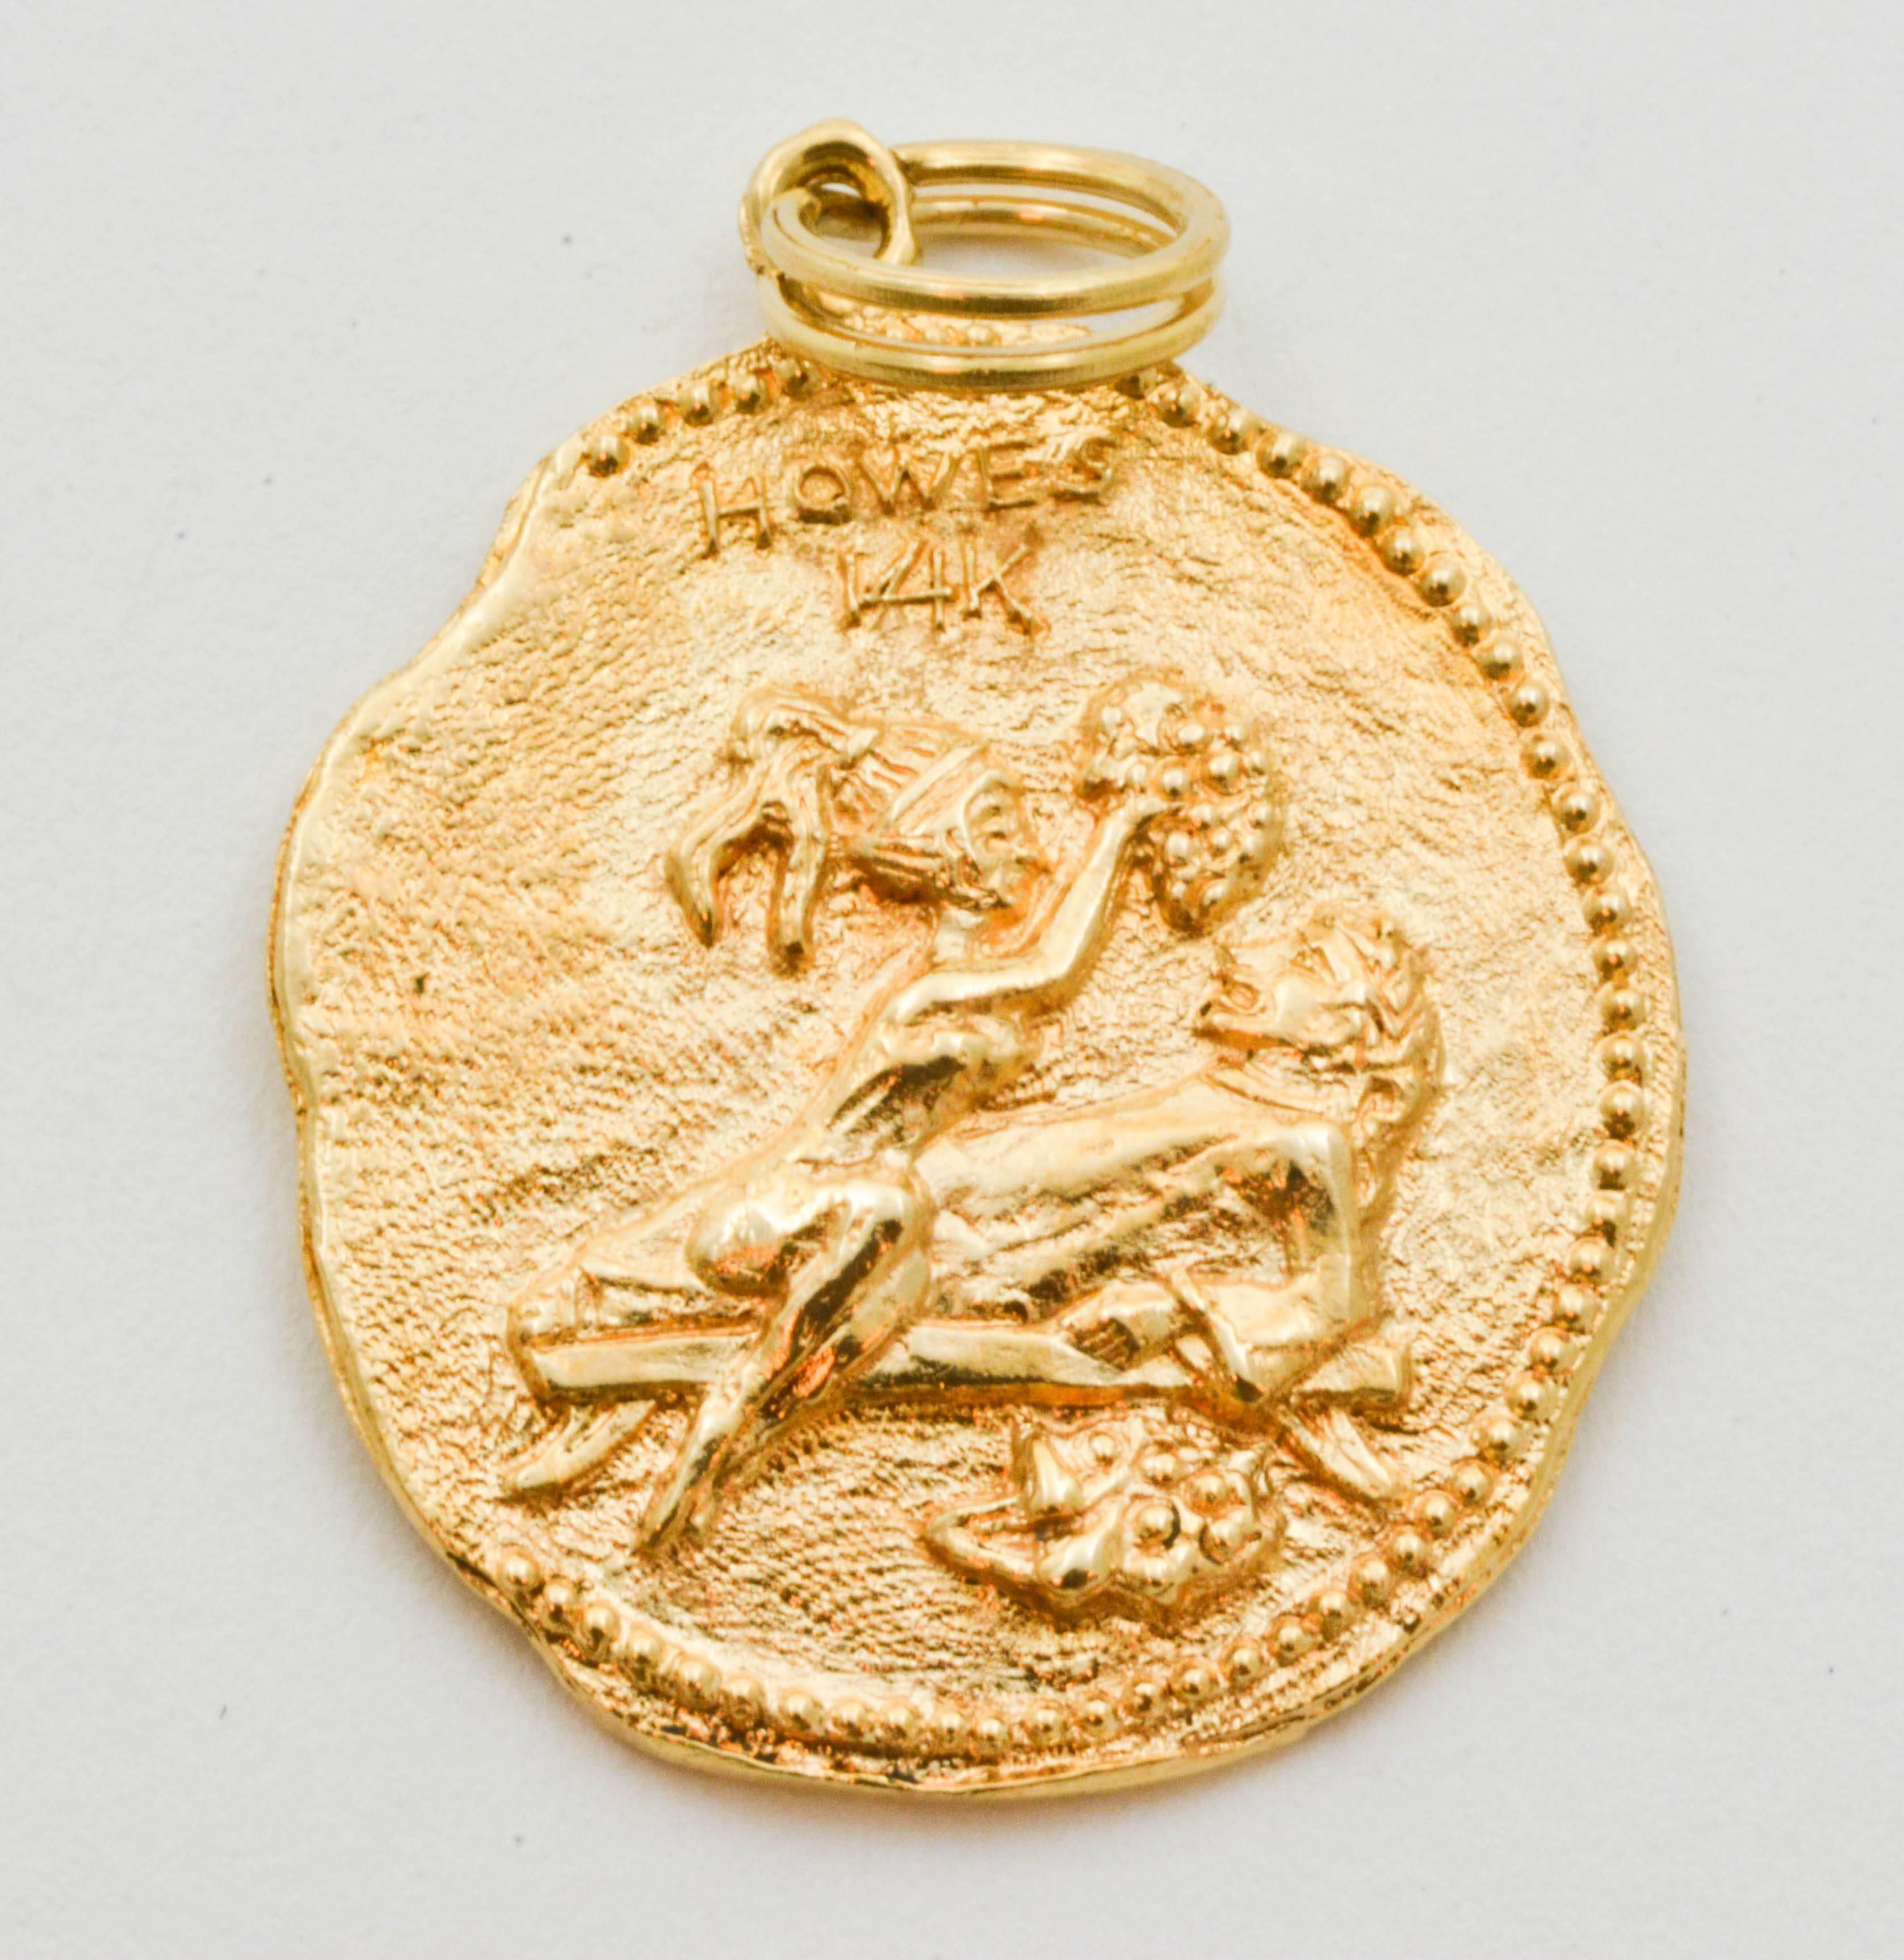 This charm is fashioned to resemble an ancient Roman coin featuring an detailed image of a Roman royal holding a scroll. “Las Vegas 1971” and “YPO” are embossed on the coin in Roman style type. The reverse side of the coin depicts a woman feeding a